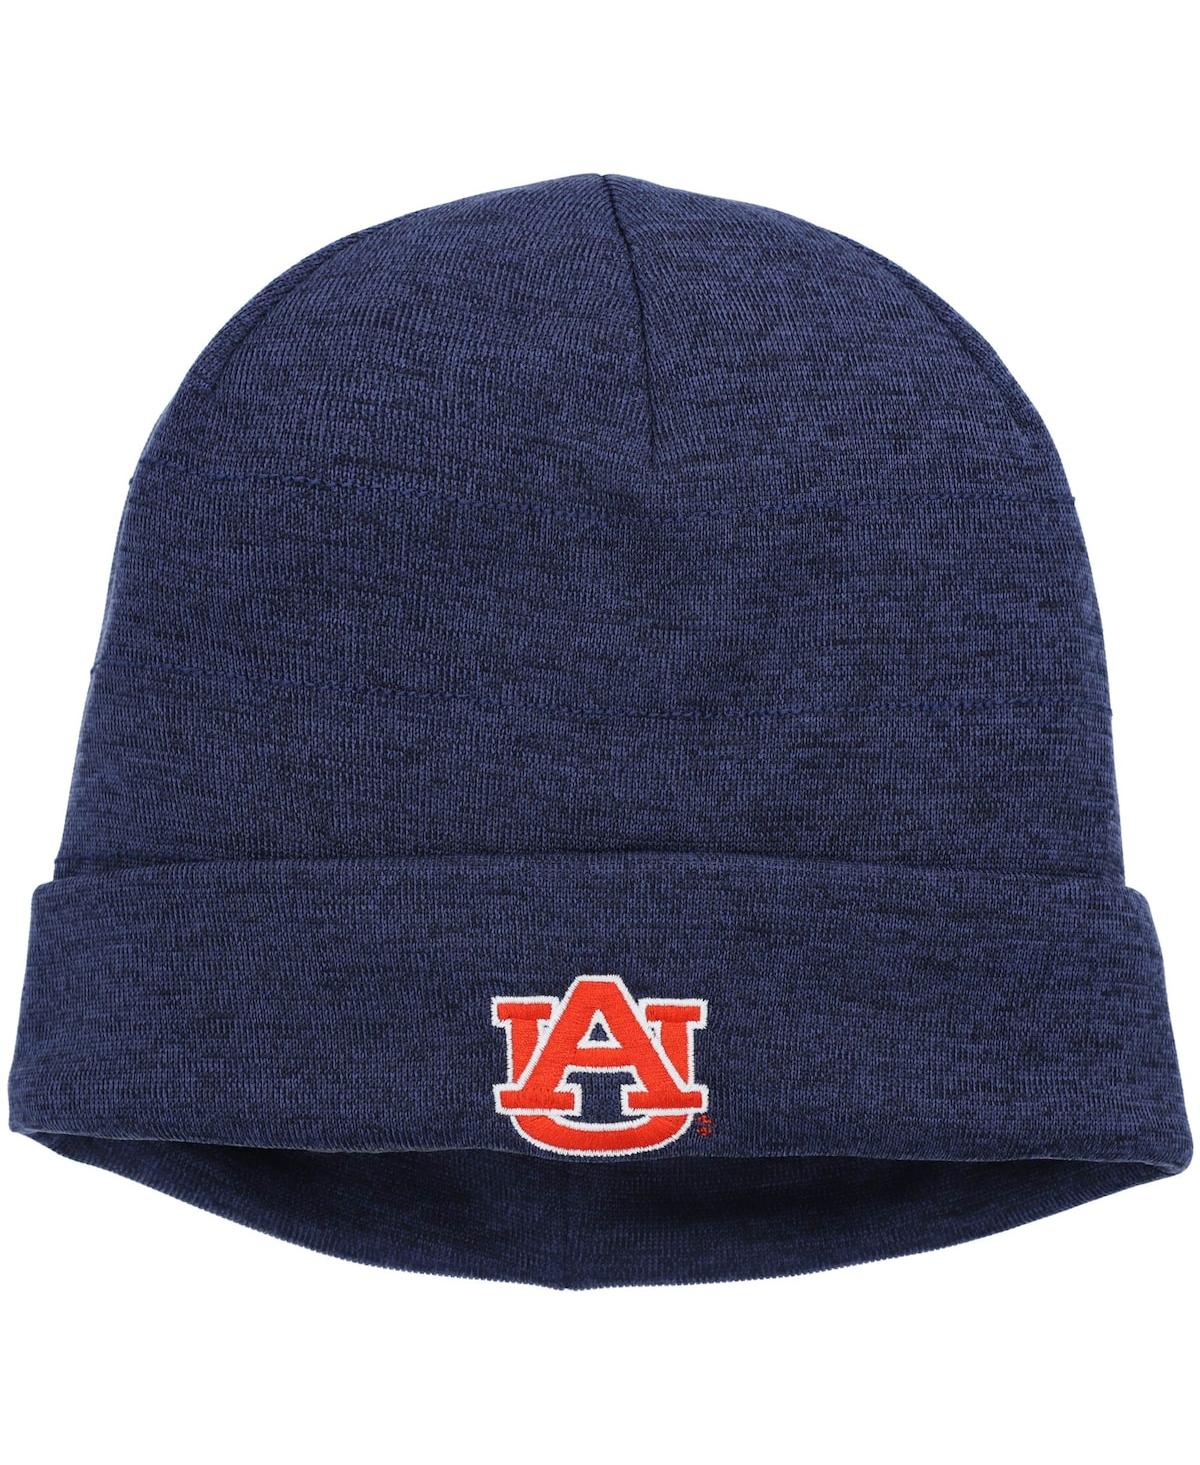 Shop Under Armour Men's  Navy Auburn Tigers 2021 Sideline Infrared Performance Cuffed Knit Hat